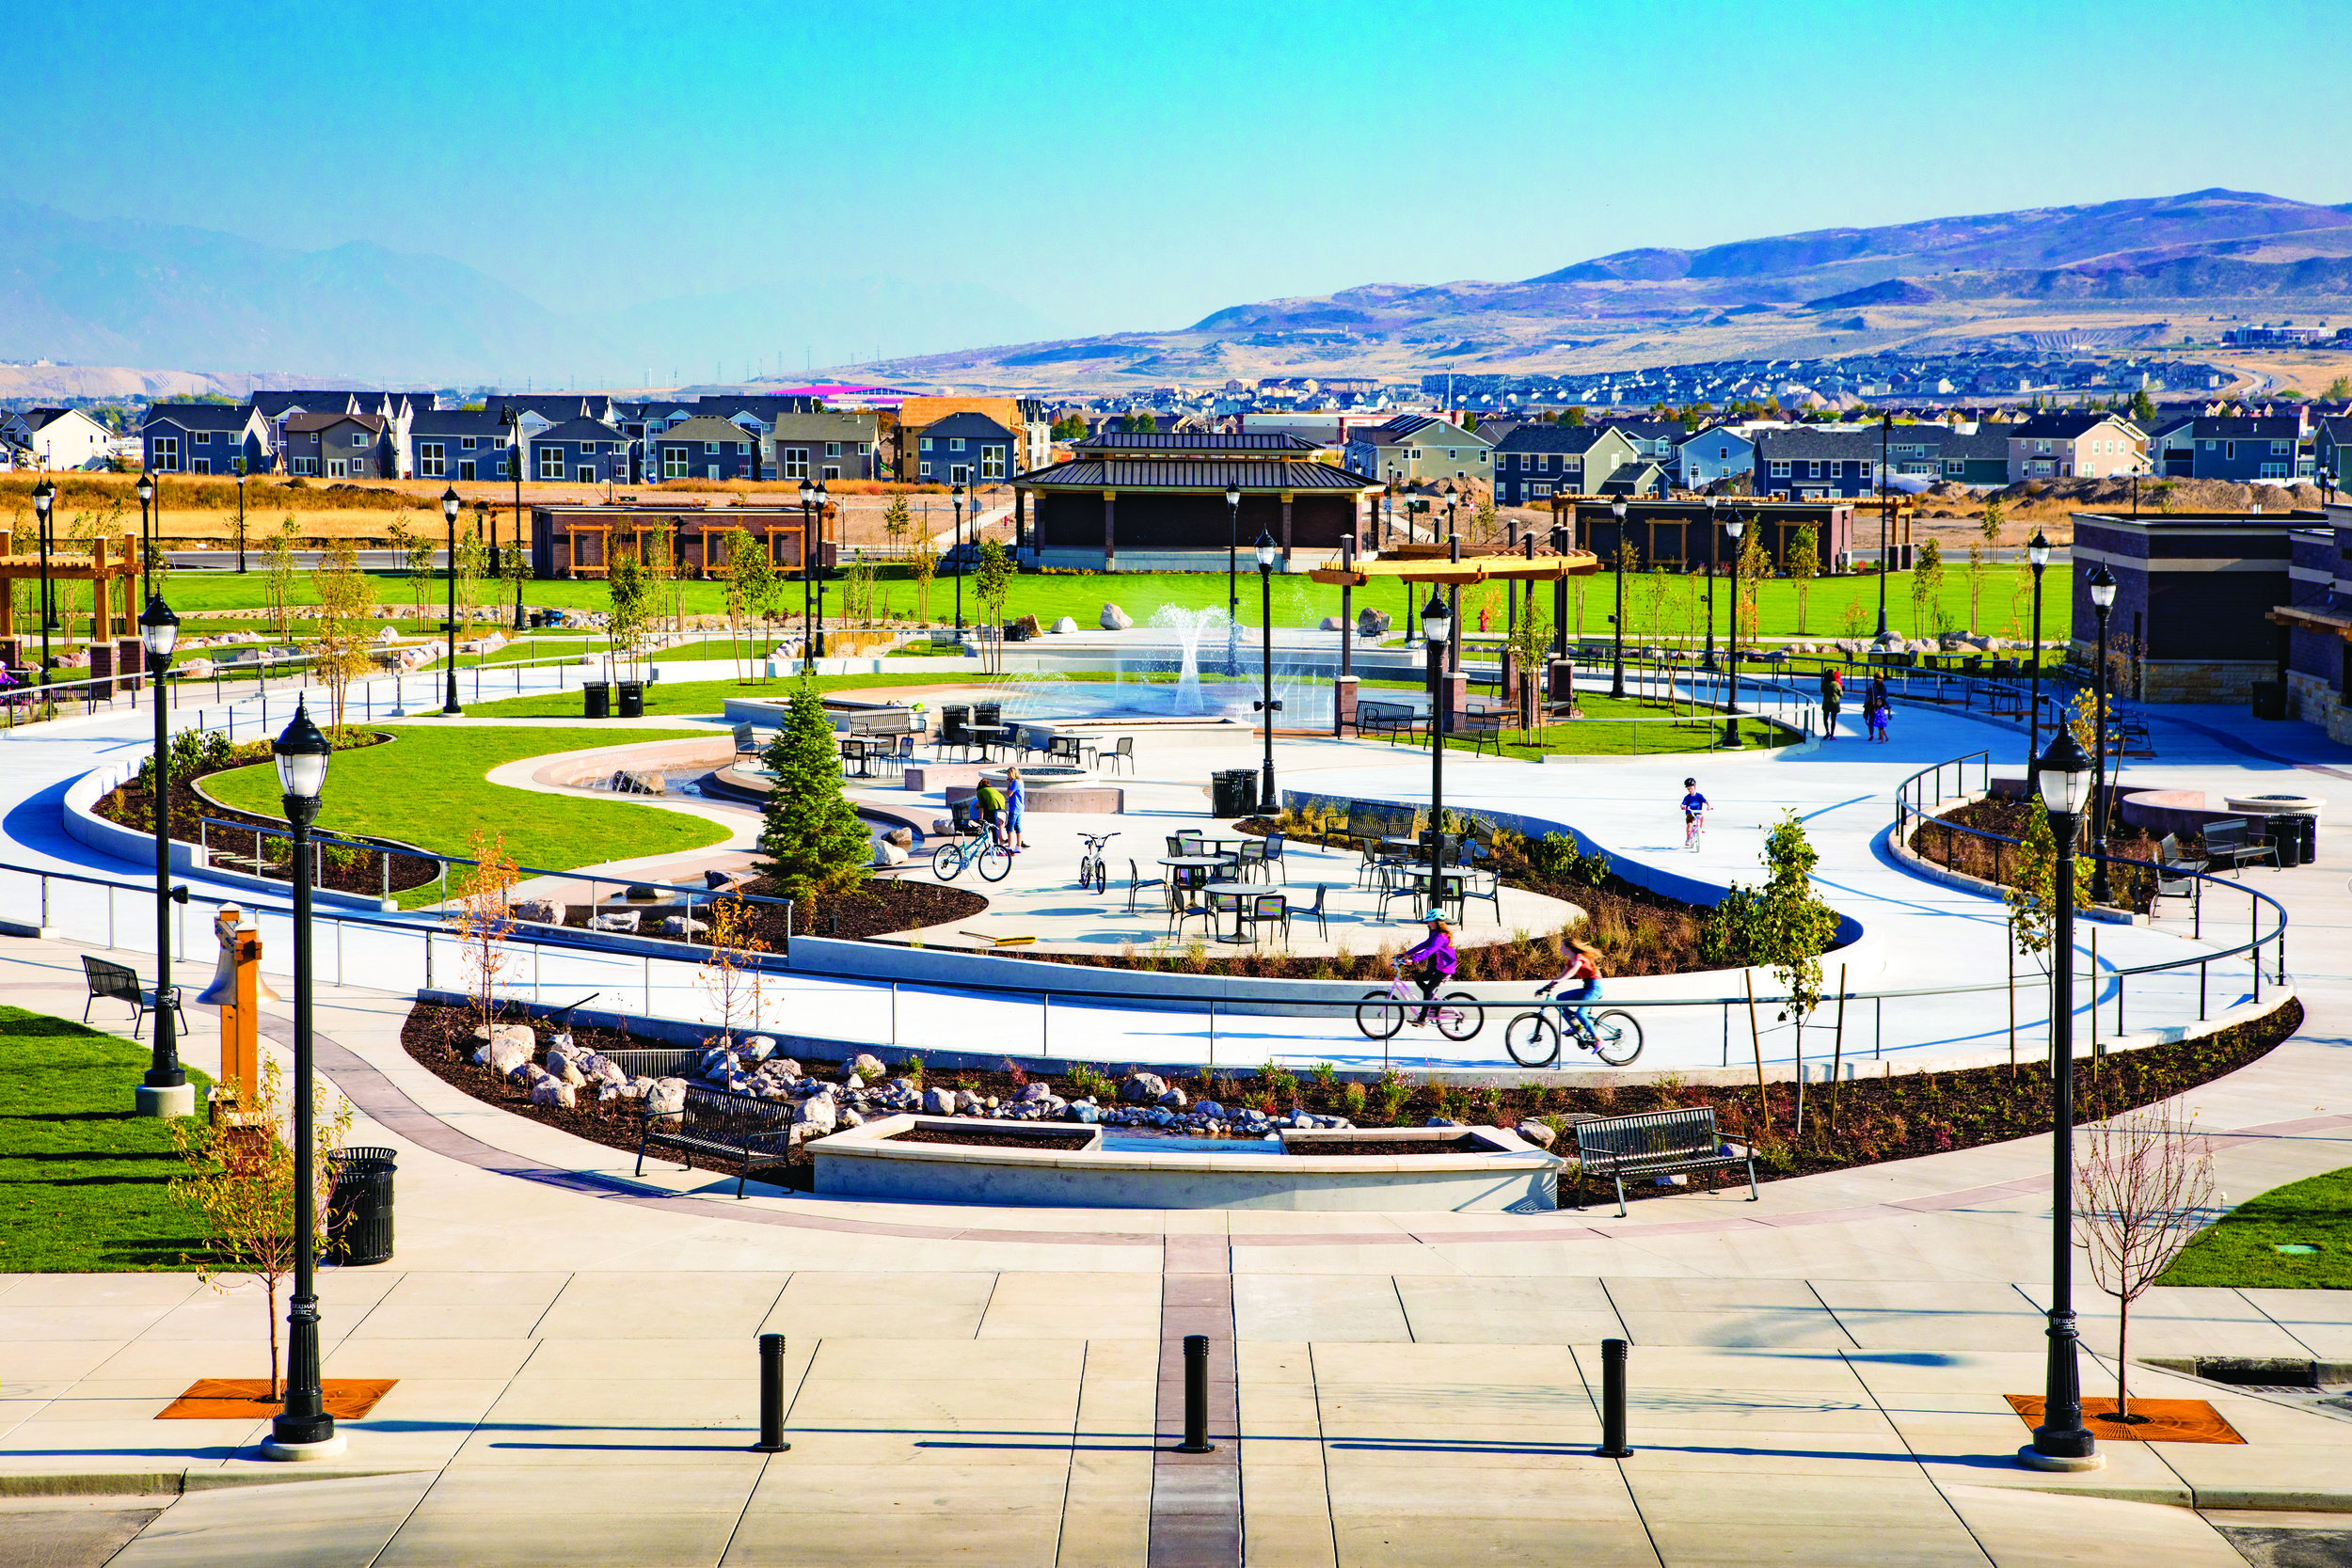  Looking toward the bandstand across J Lynn Crane Park from the steps of City Hall, many of the significant elements of the Towne Center are visible. The Ice Ribbon, being used by cyclists in this photo, surrounds the Splash Pad, Interactive River, F